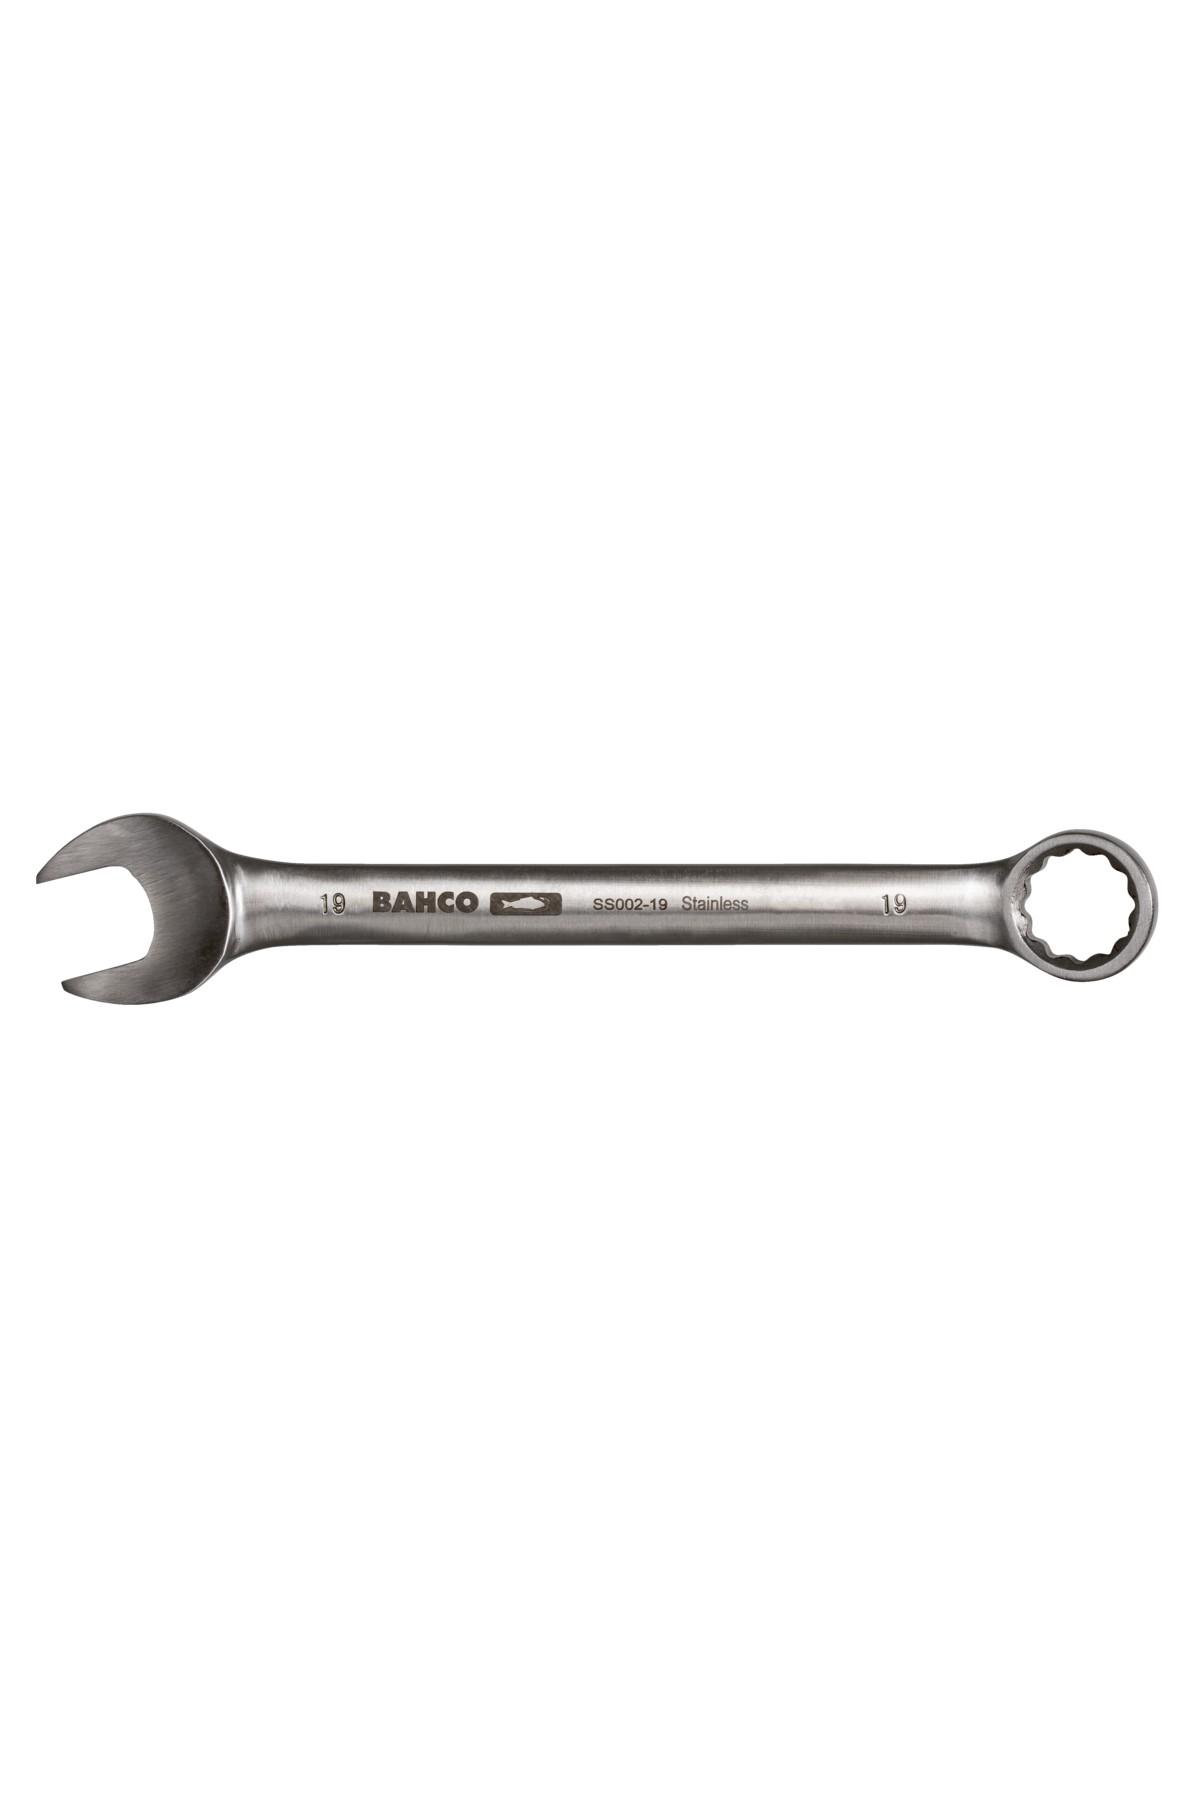 Ring spanner stainless 11mm